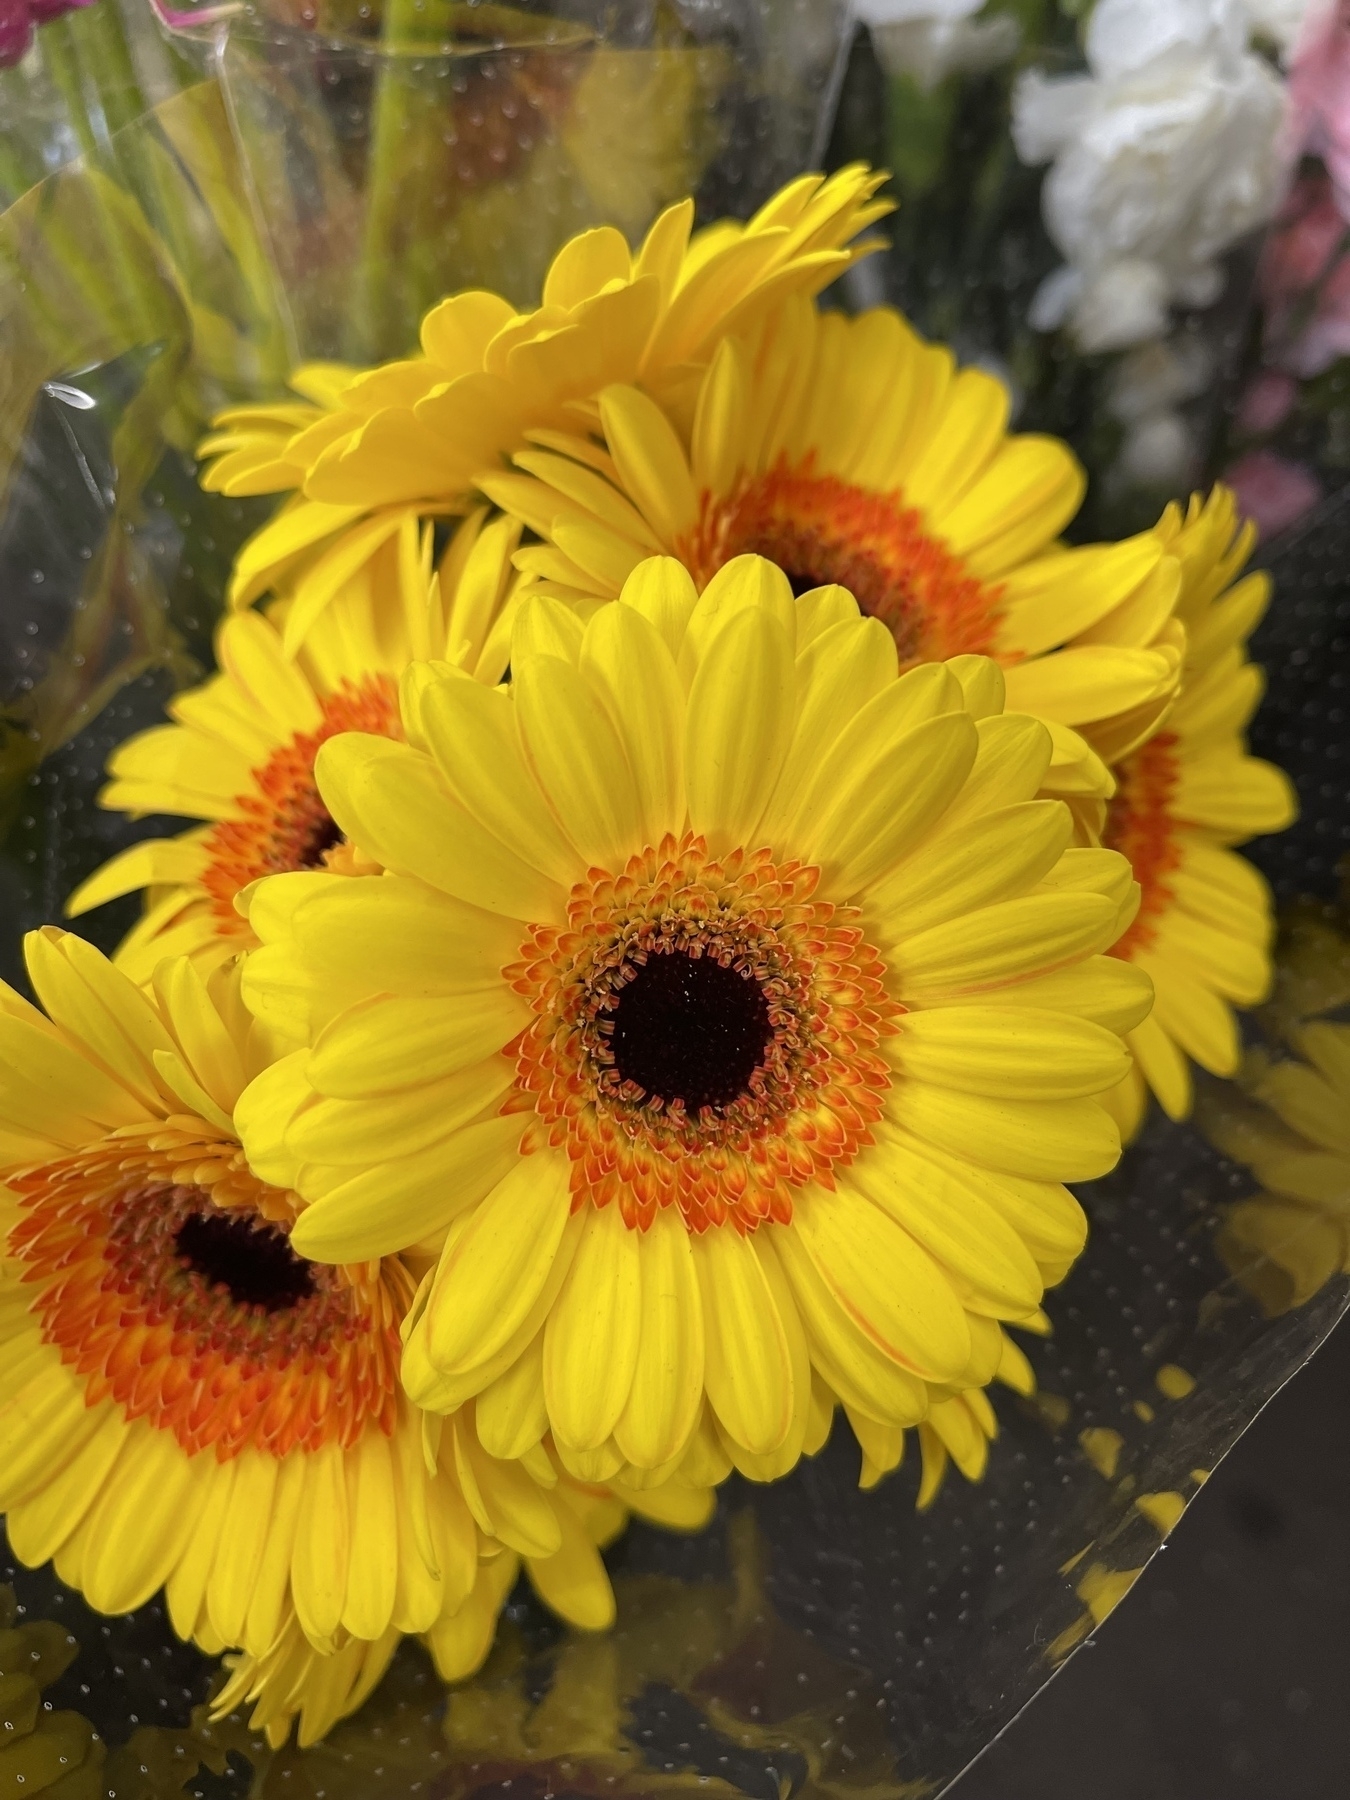 Bright yellow Gerbera flowers with a orange and brown tufted rosettes